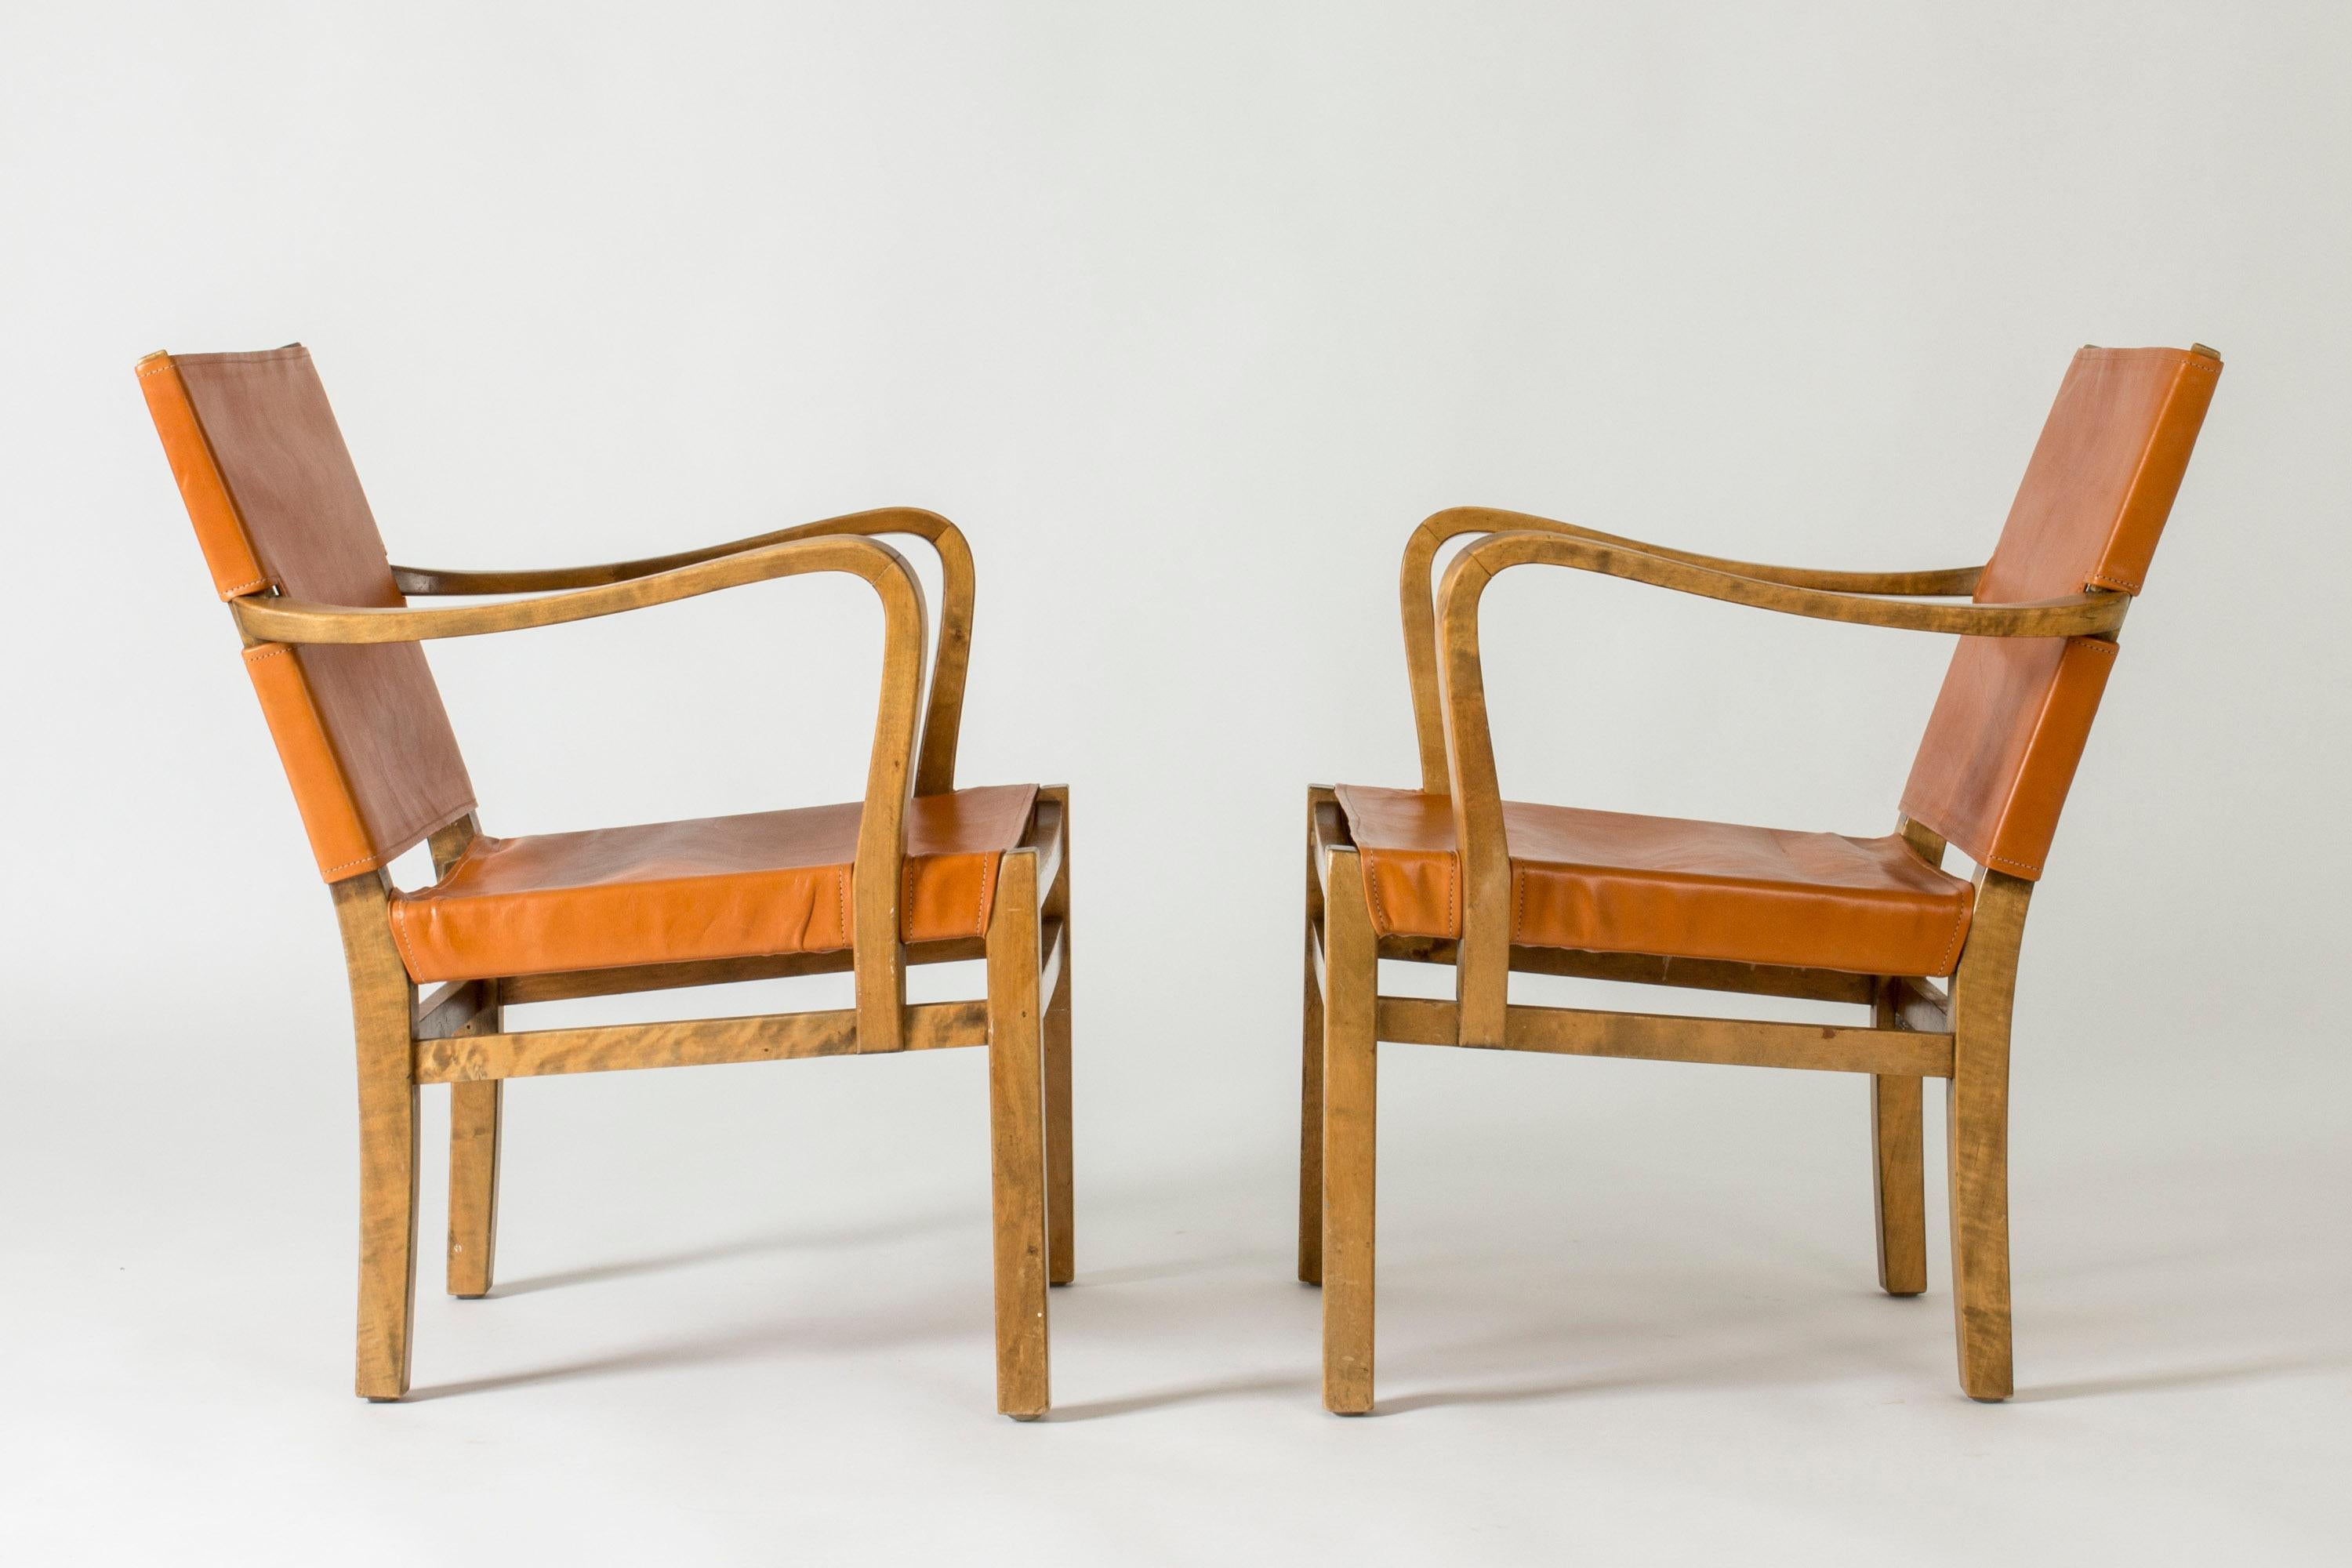 Scandinavian Modern Armchairs by Elias Svedberg, Sweden, 1930s In Good Condition For Sale In Stockholm, SE